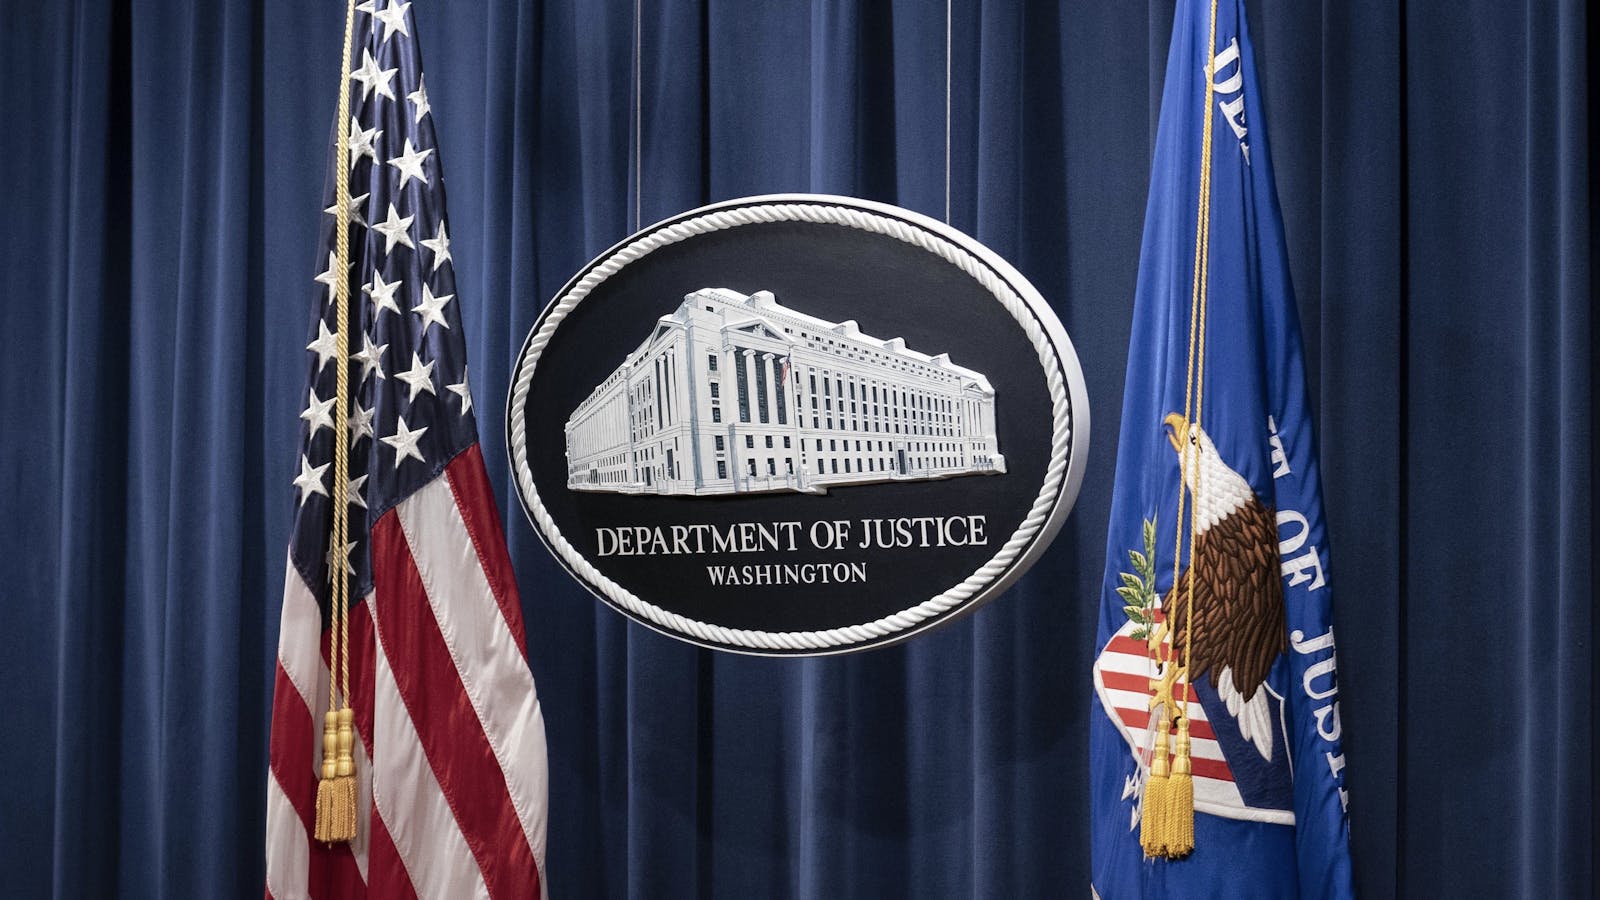 The Justice Department's sign at a press conference. Photo by Bloomberg